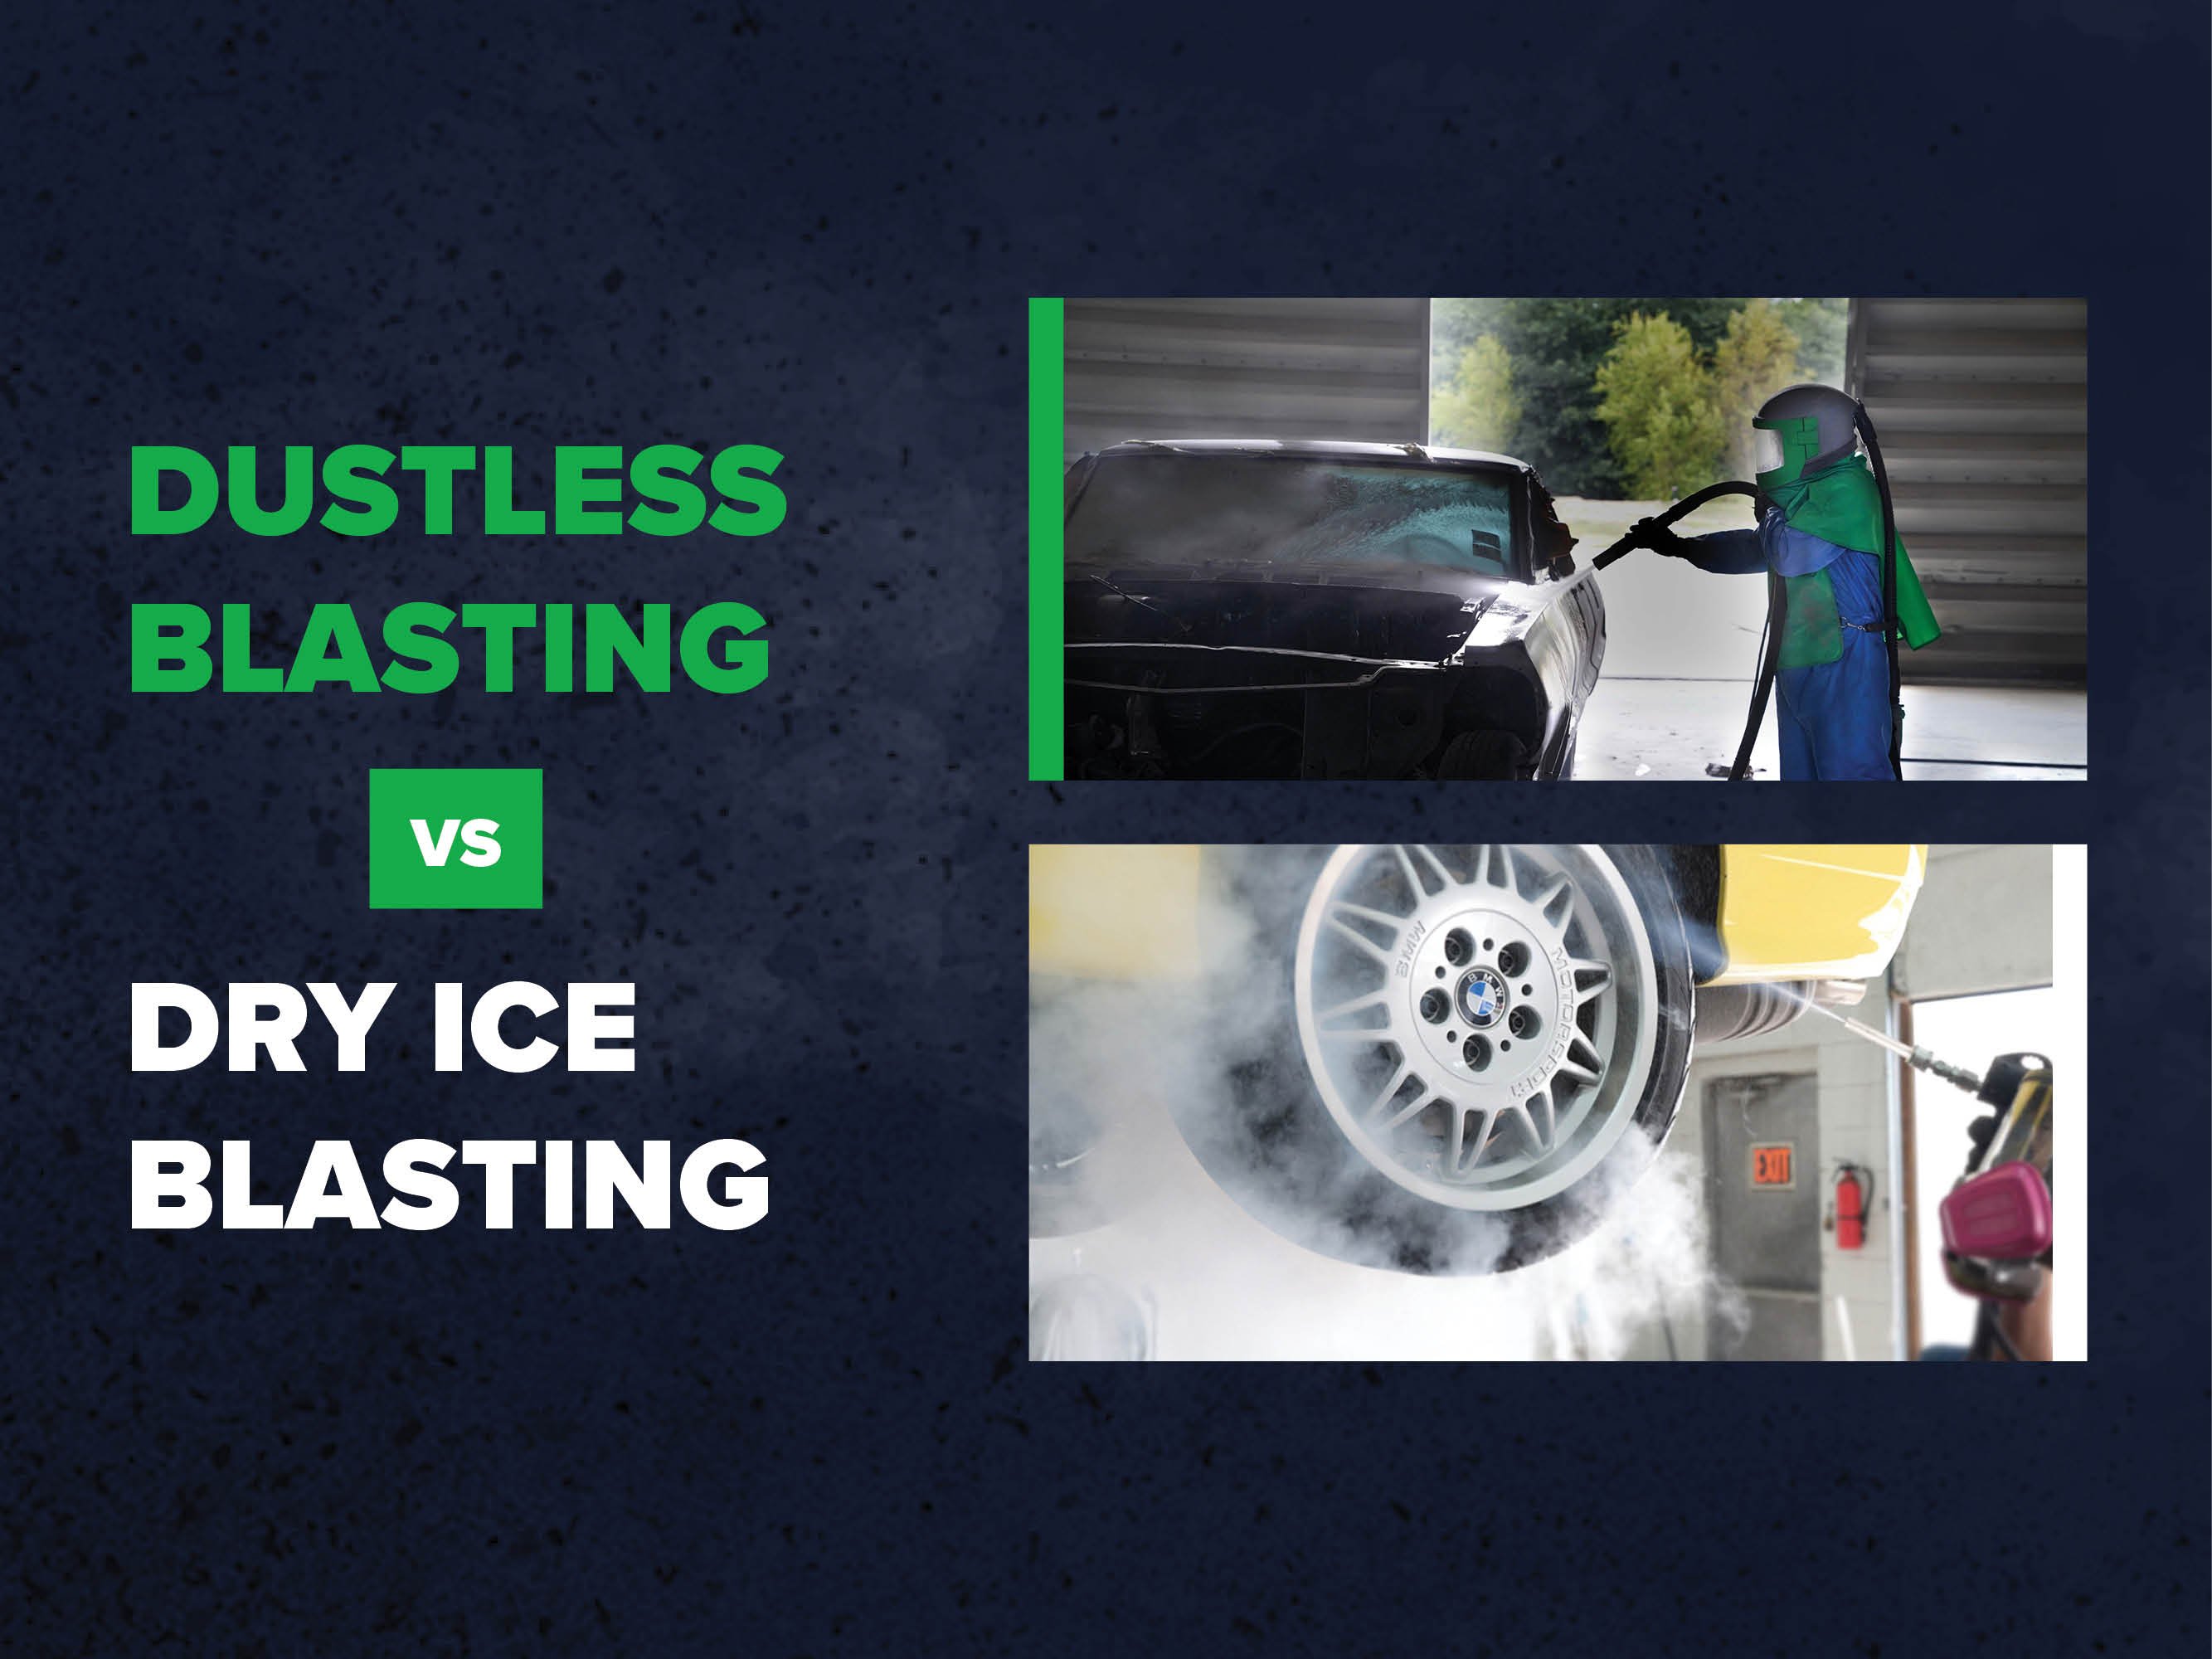 Comparing Dry Ice Cleaning to Dustless Blasting